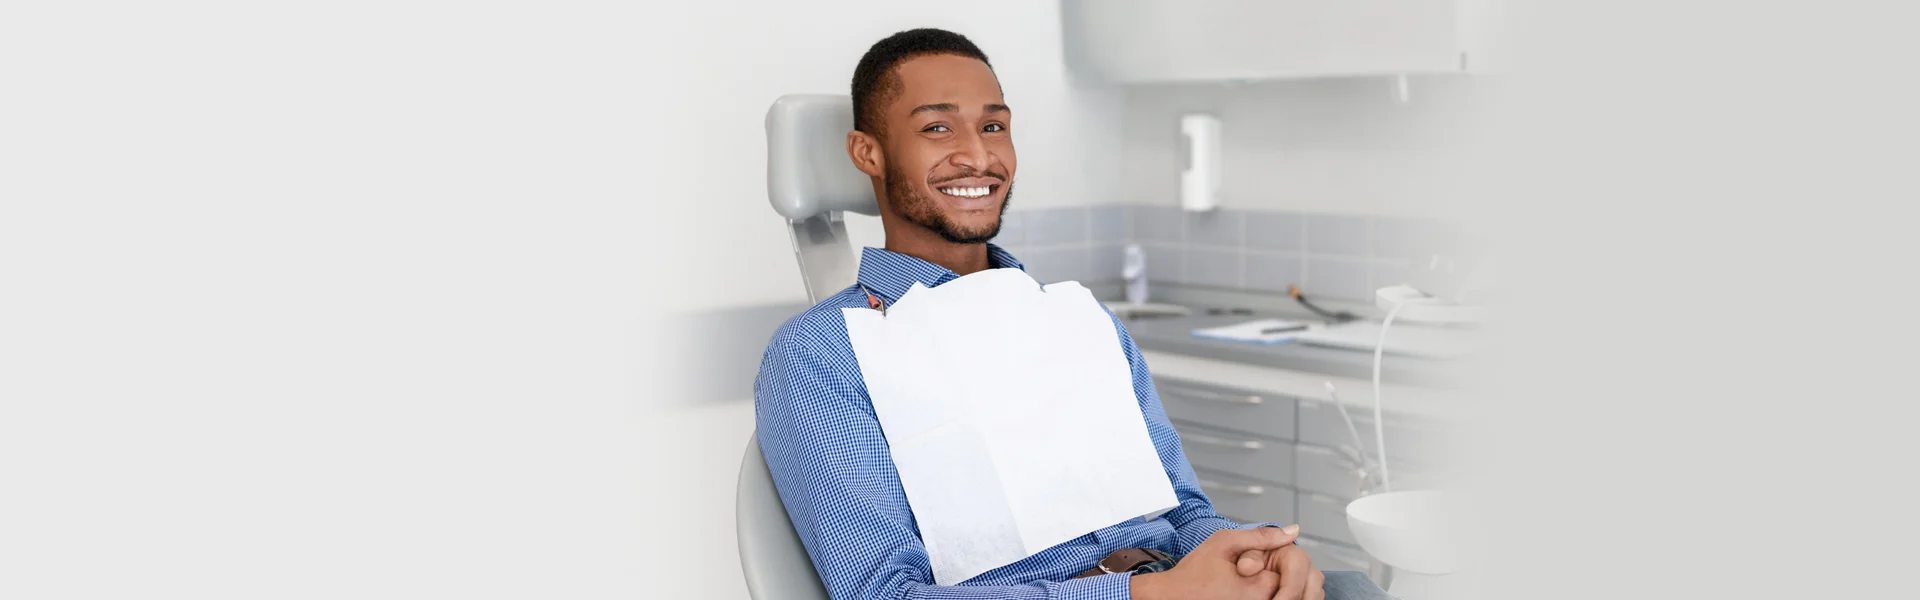 Post-Tooth Extraction Care: What to Expect and How to Recover Quickly